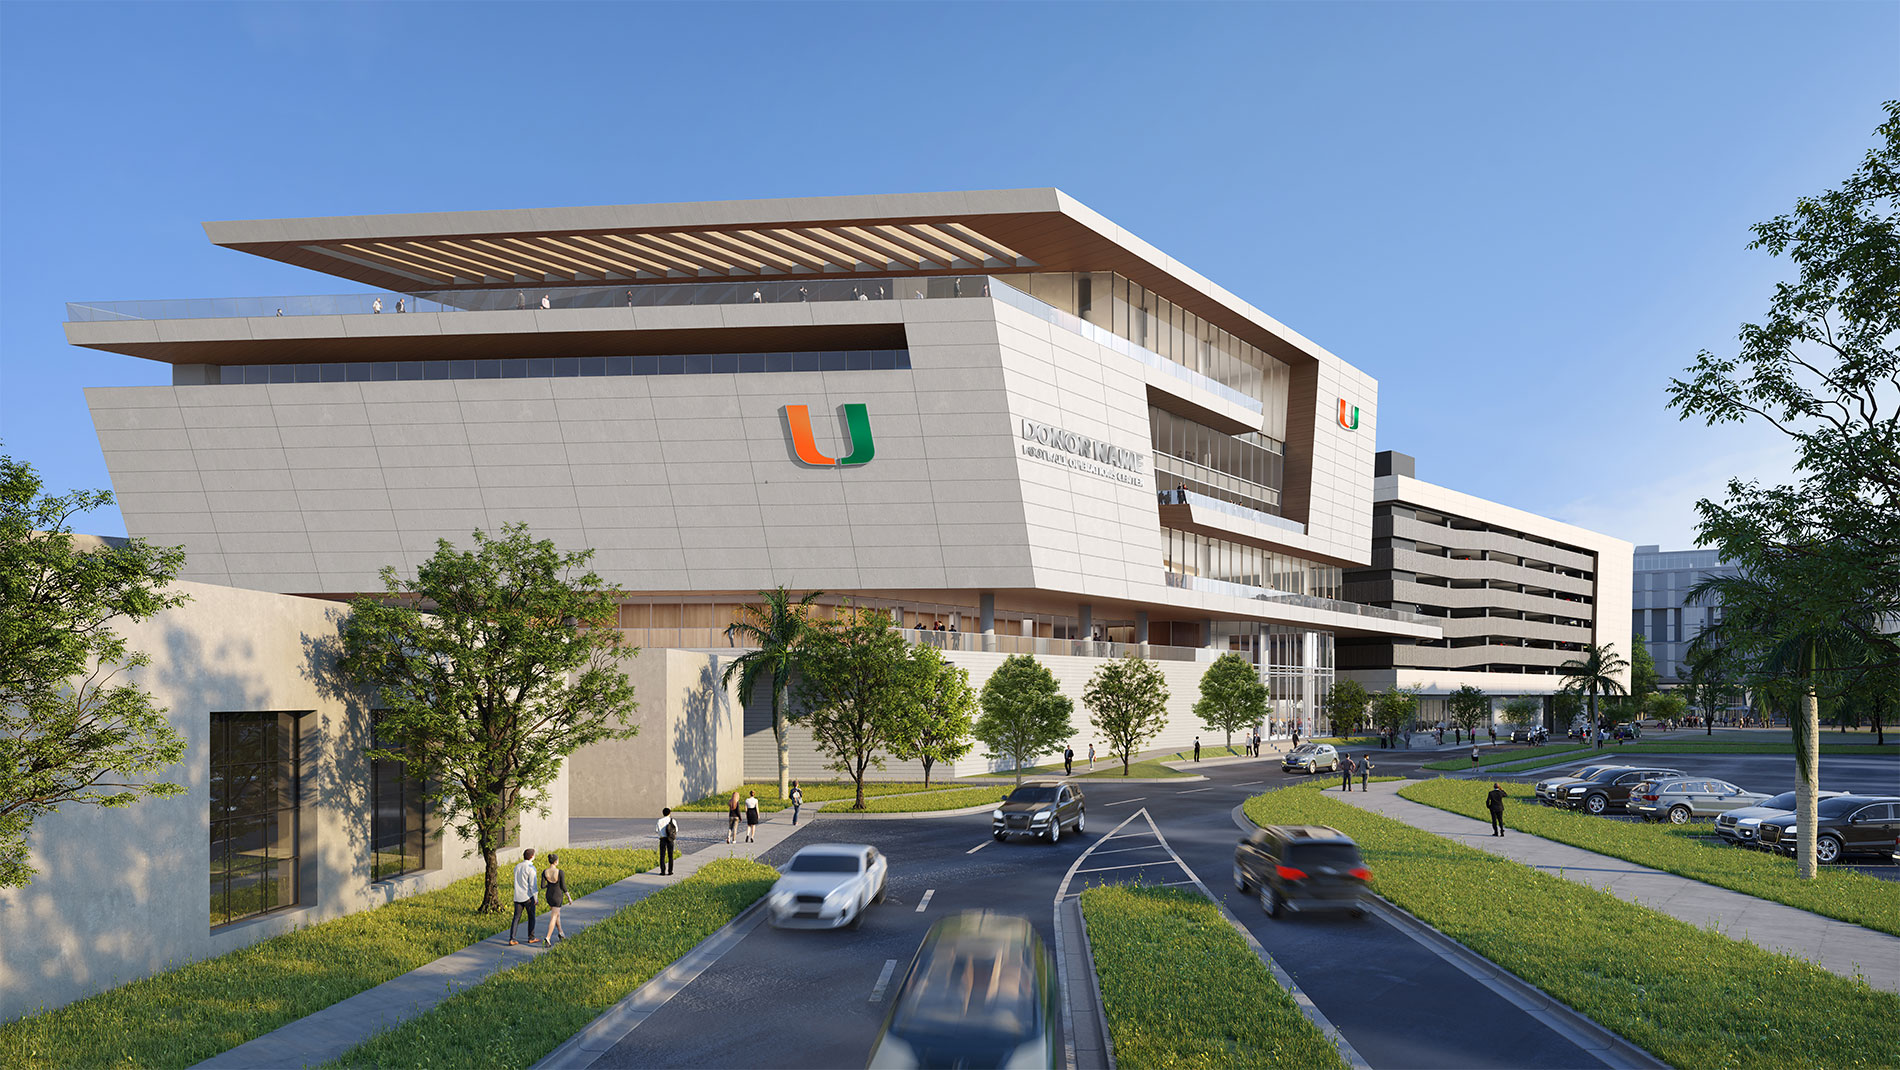 University of Miami Announces Plans for New Football Operations Center